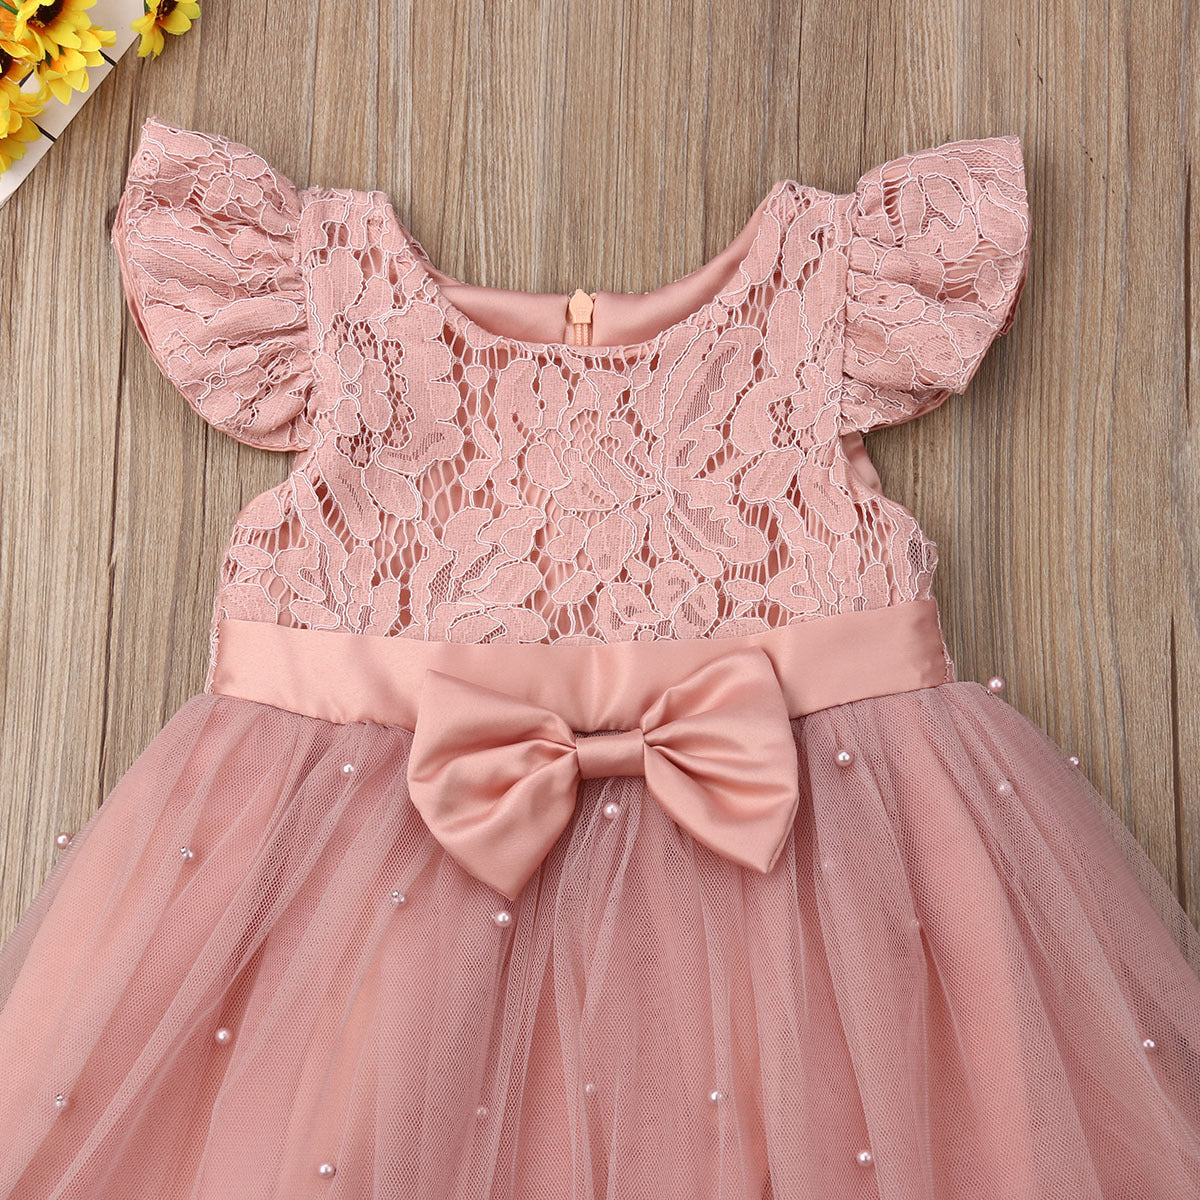 Girls Dress - Occasion Dress for Toddlers and Kids